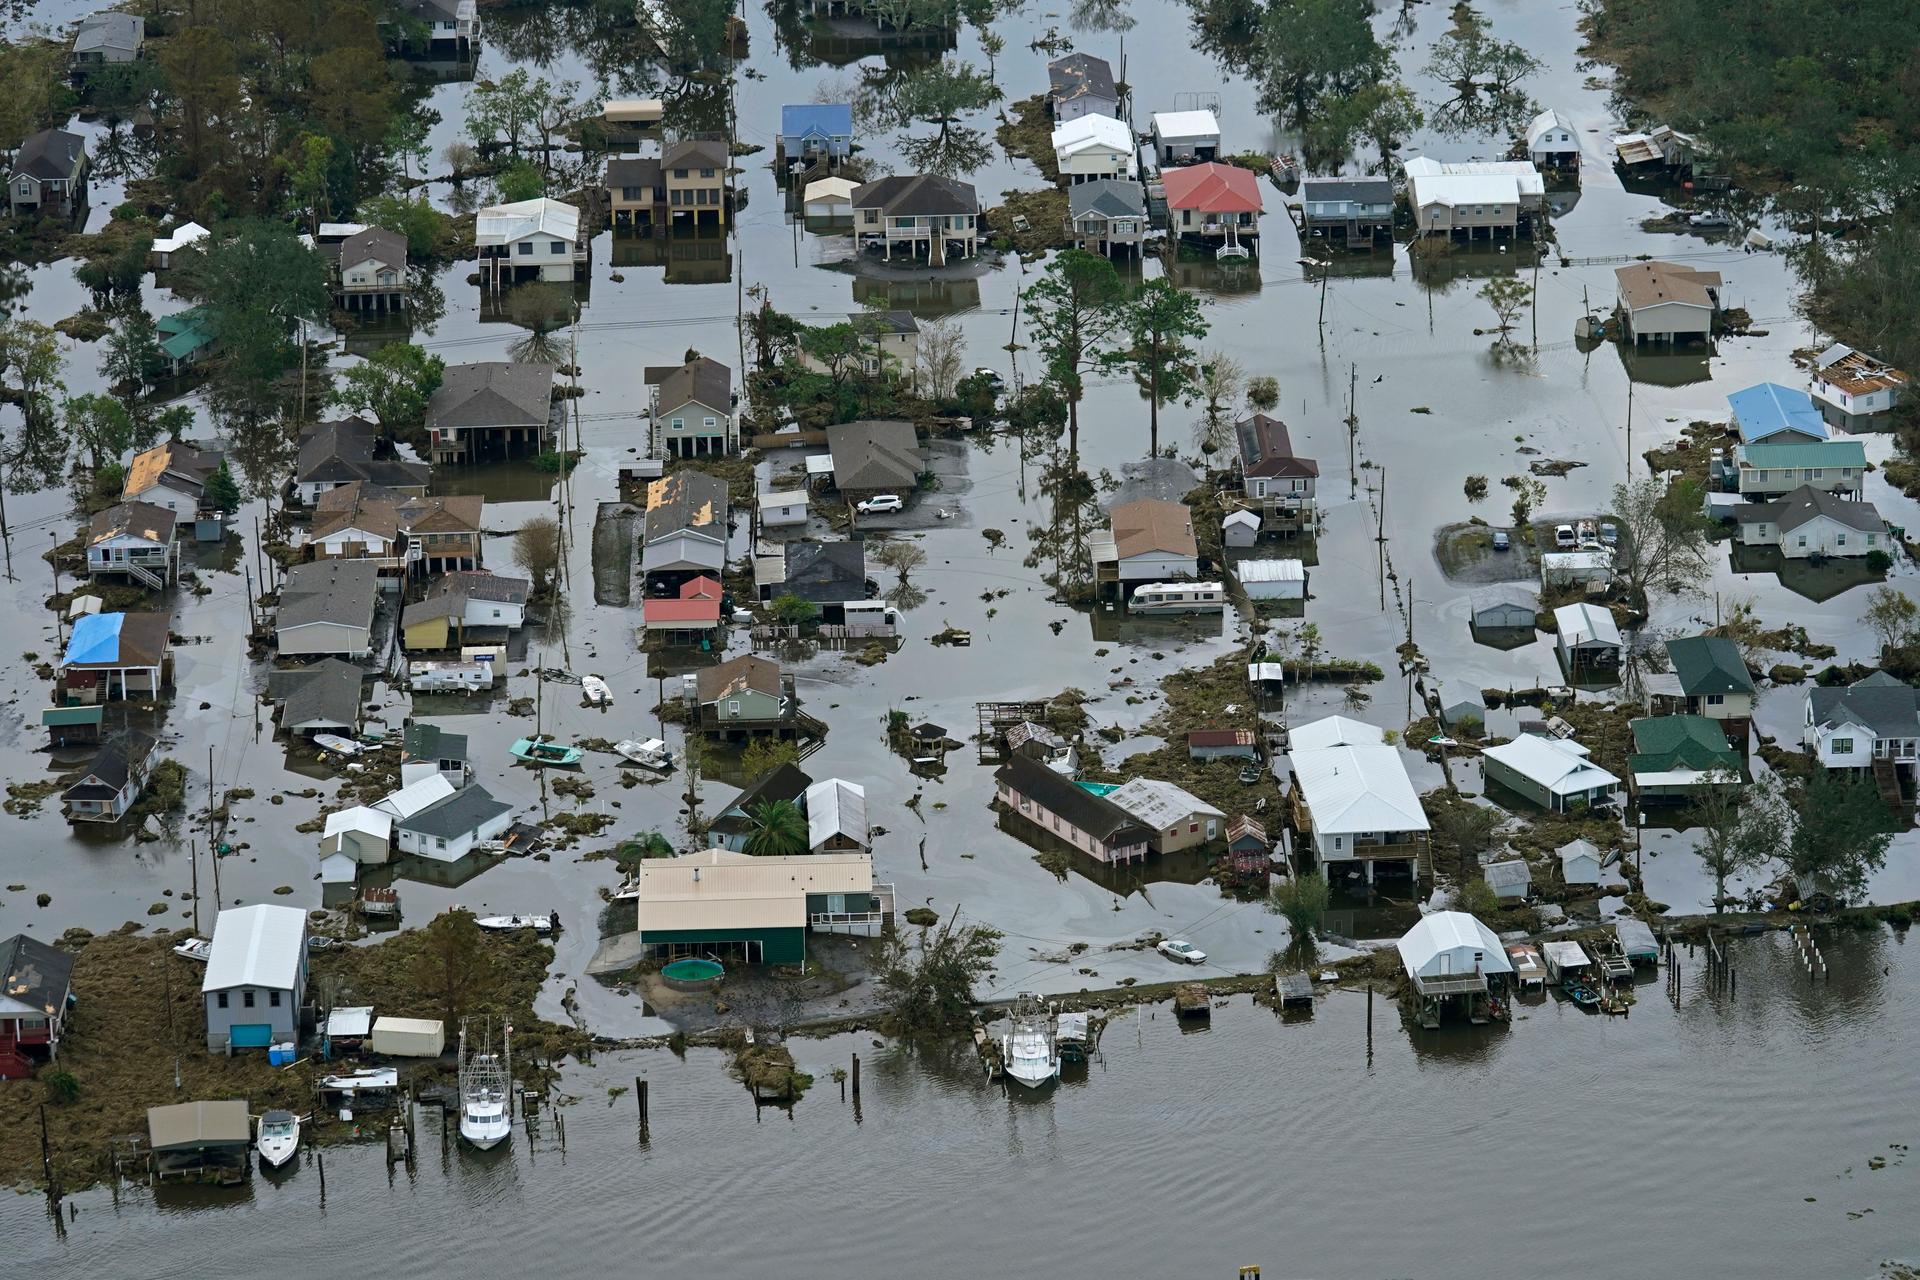 Floodwaters slowly recede in the aftermath of Hurricane Ida in Lafitte, Louisiana, Wednesday, Sept. 1, 2021.